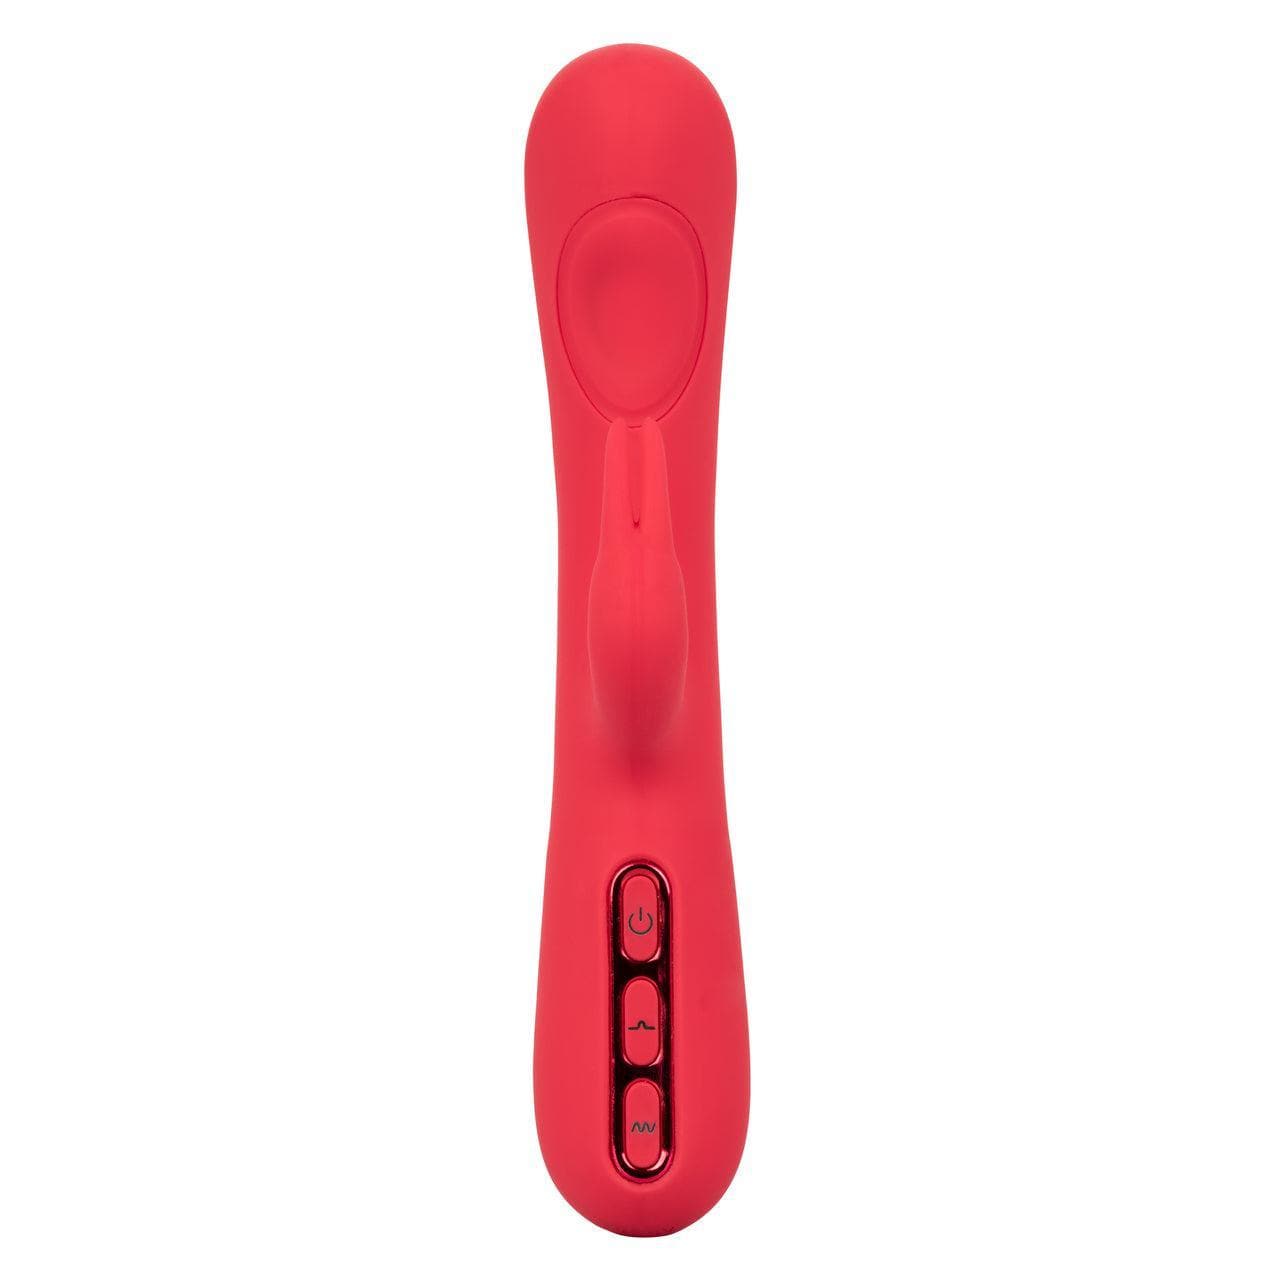 Throb Pulse Silicone Pulsating Curved Tip Thumping Rabbit Vibrator - Romantic Blessings